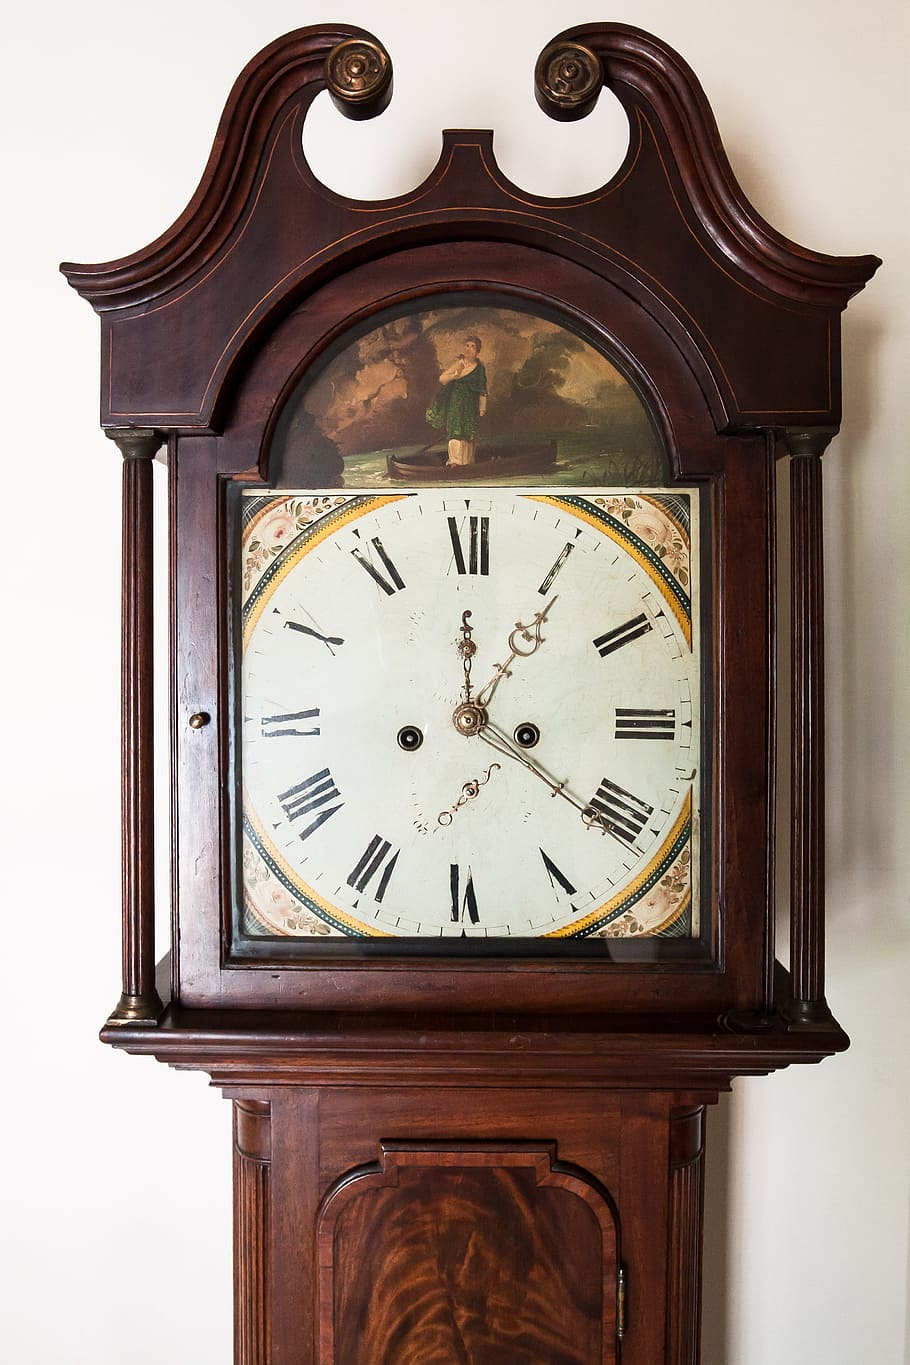 brown, grandfather, clock, displaying, 12:40, Grandfather Clock, Pointer, roman numerals, wood, time